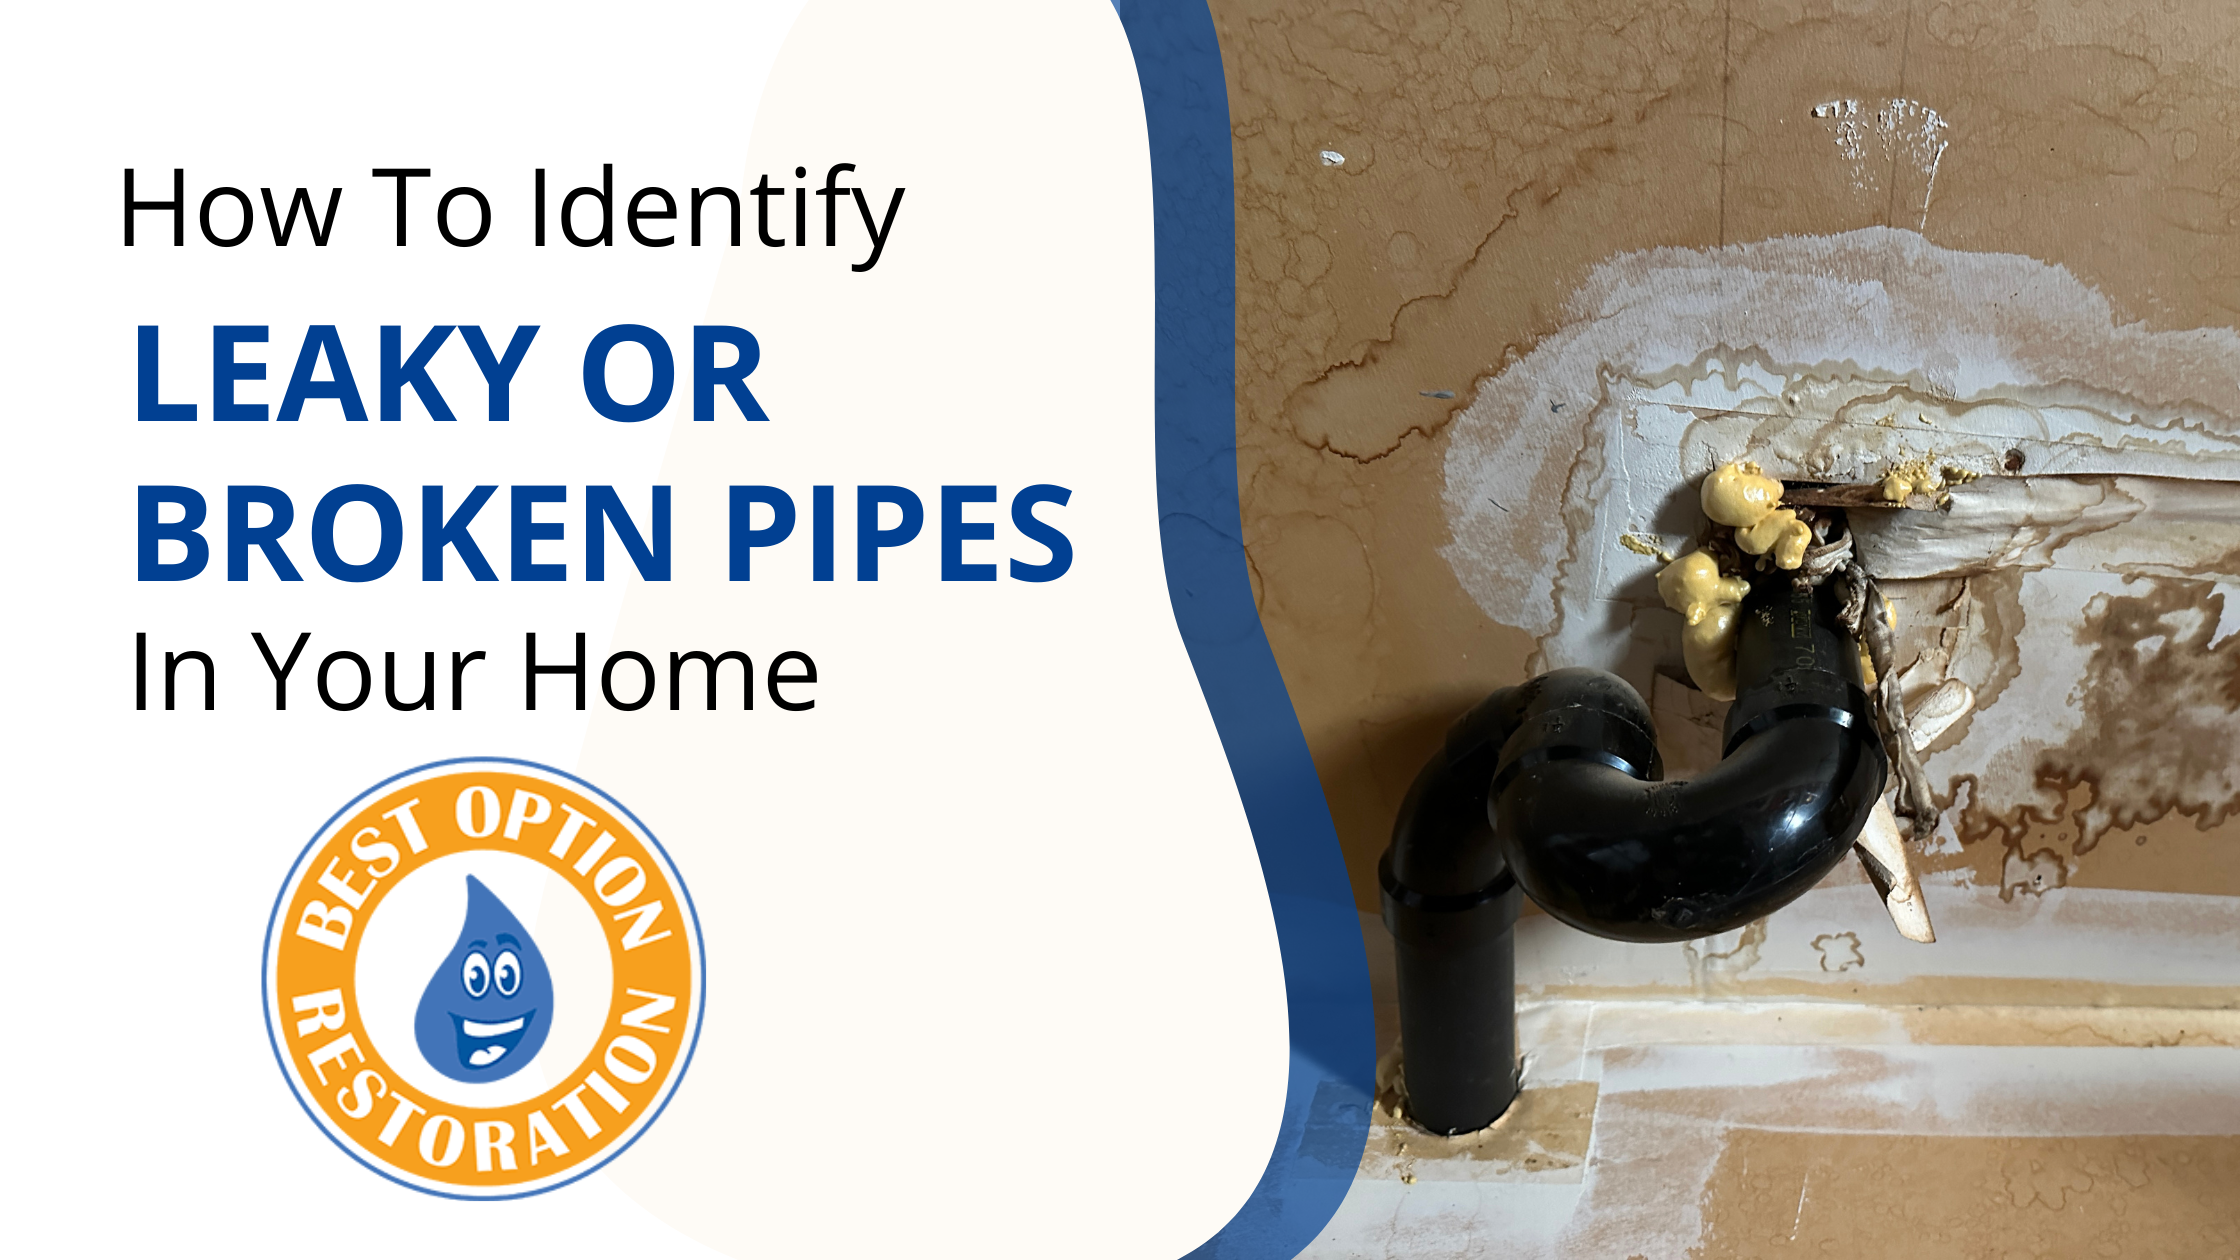 How to Identify Leaky or Broken Pipes in Your Home, Business or Rental Property